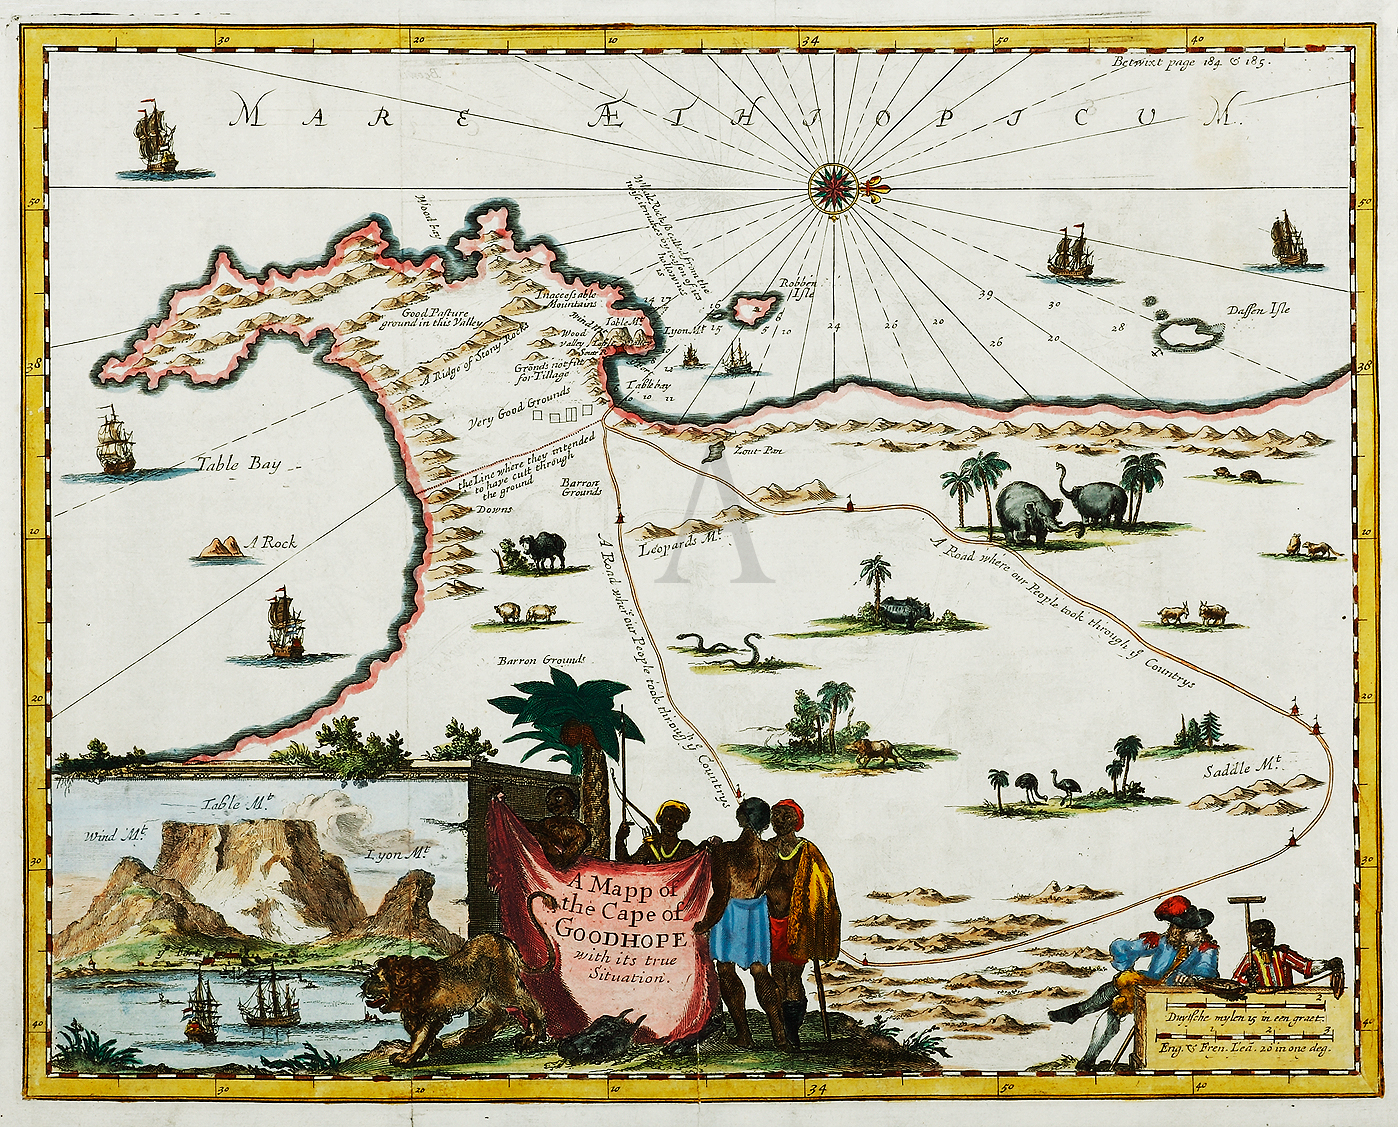 A Mapp of the Cape of Goodhope with its true Situation - Antique Print from 1704